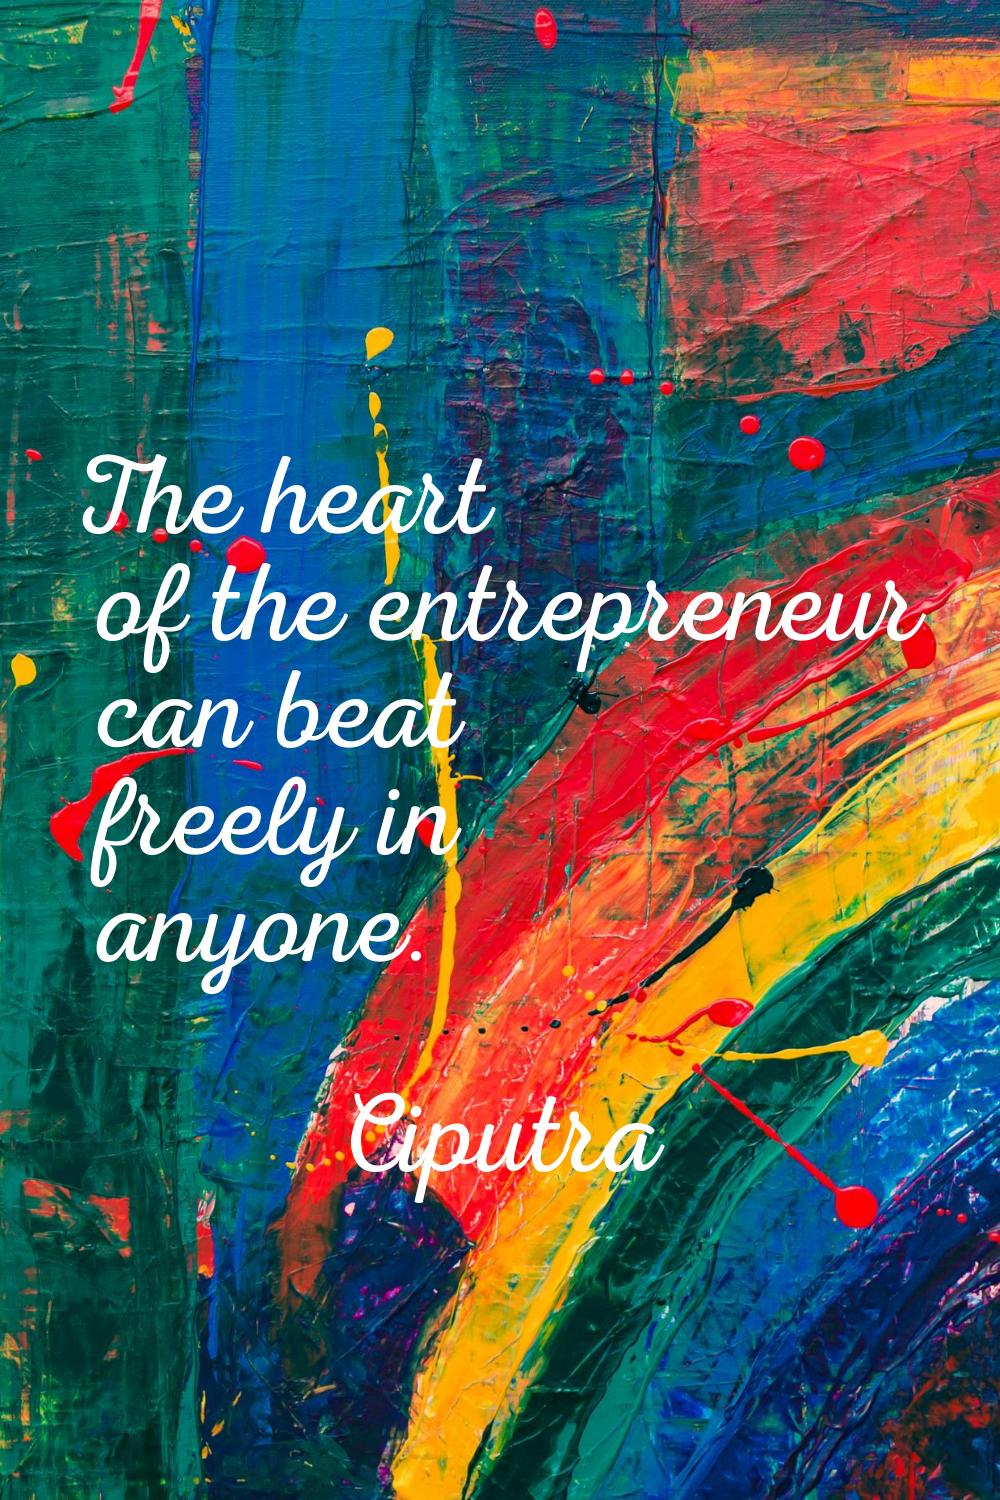 The heart of the entrepreneur can beat freely in anyone.